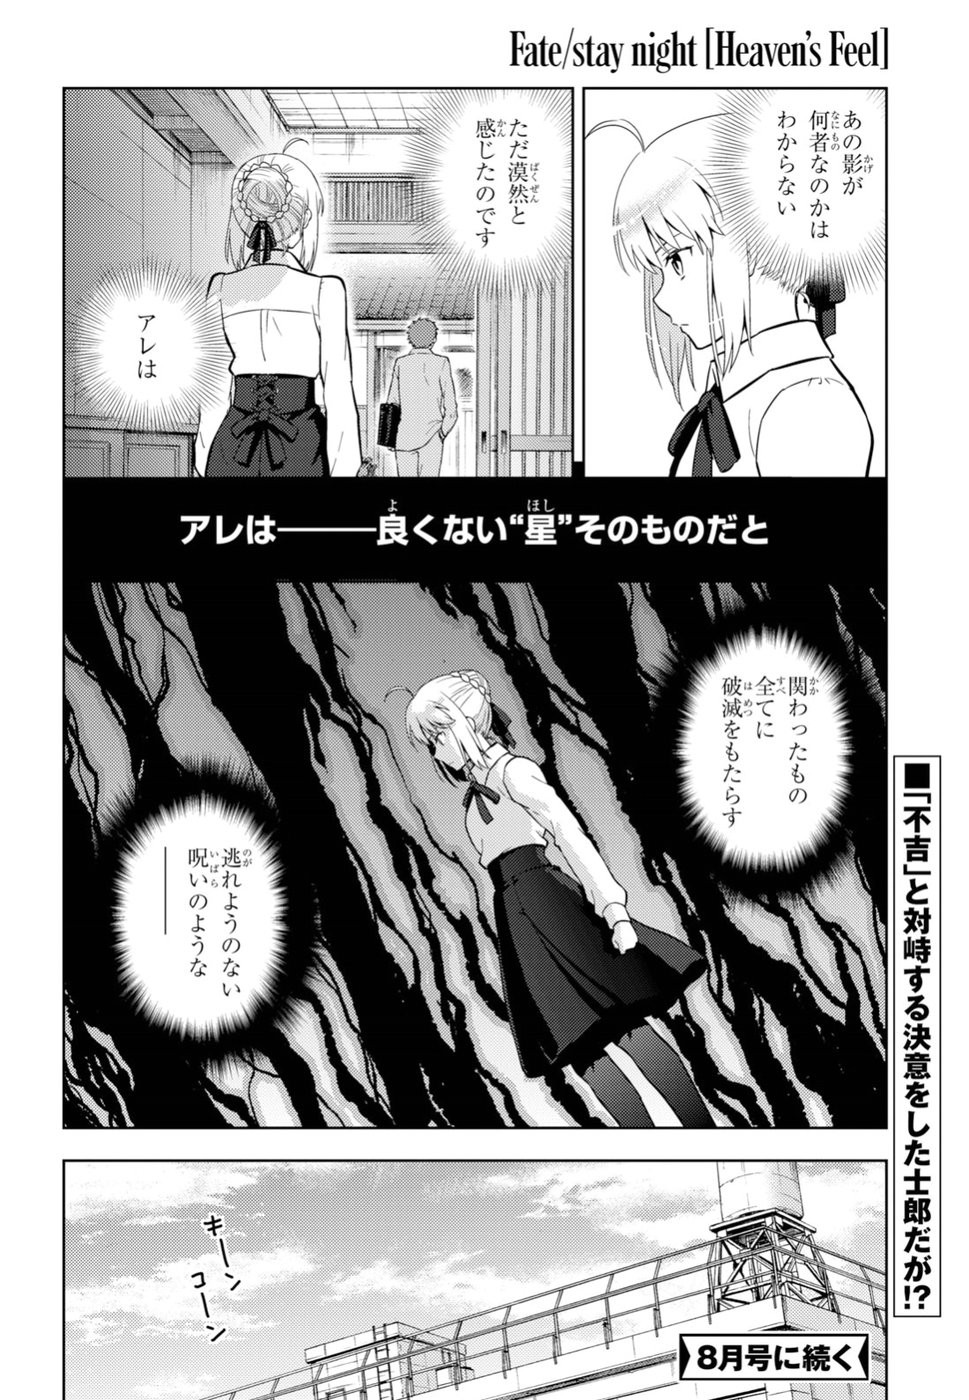 Fate/Stay night Heaven's Feel - Chapter 48 - Page 14